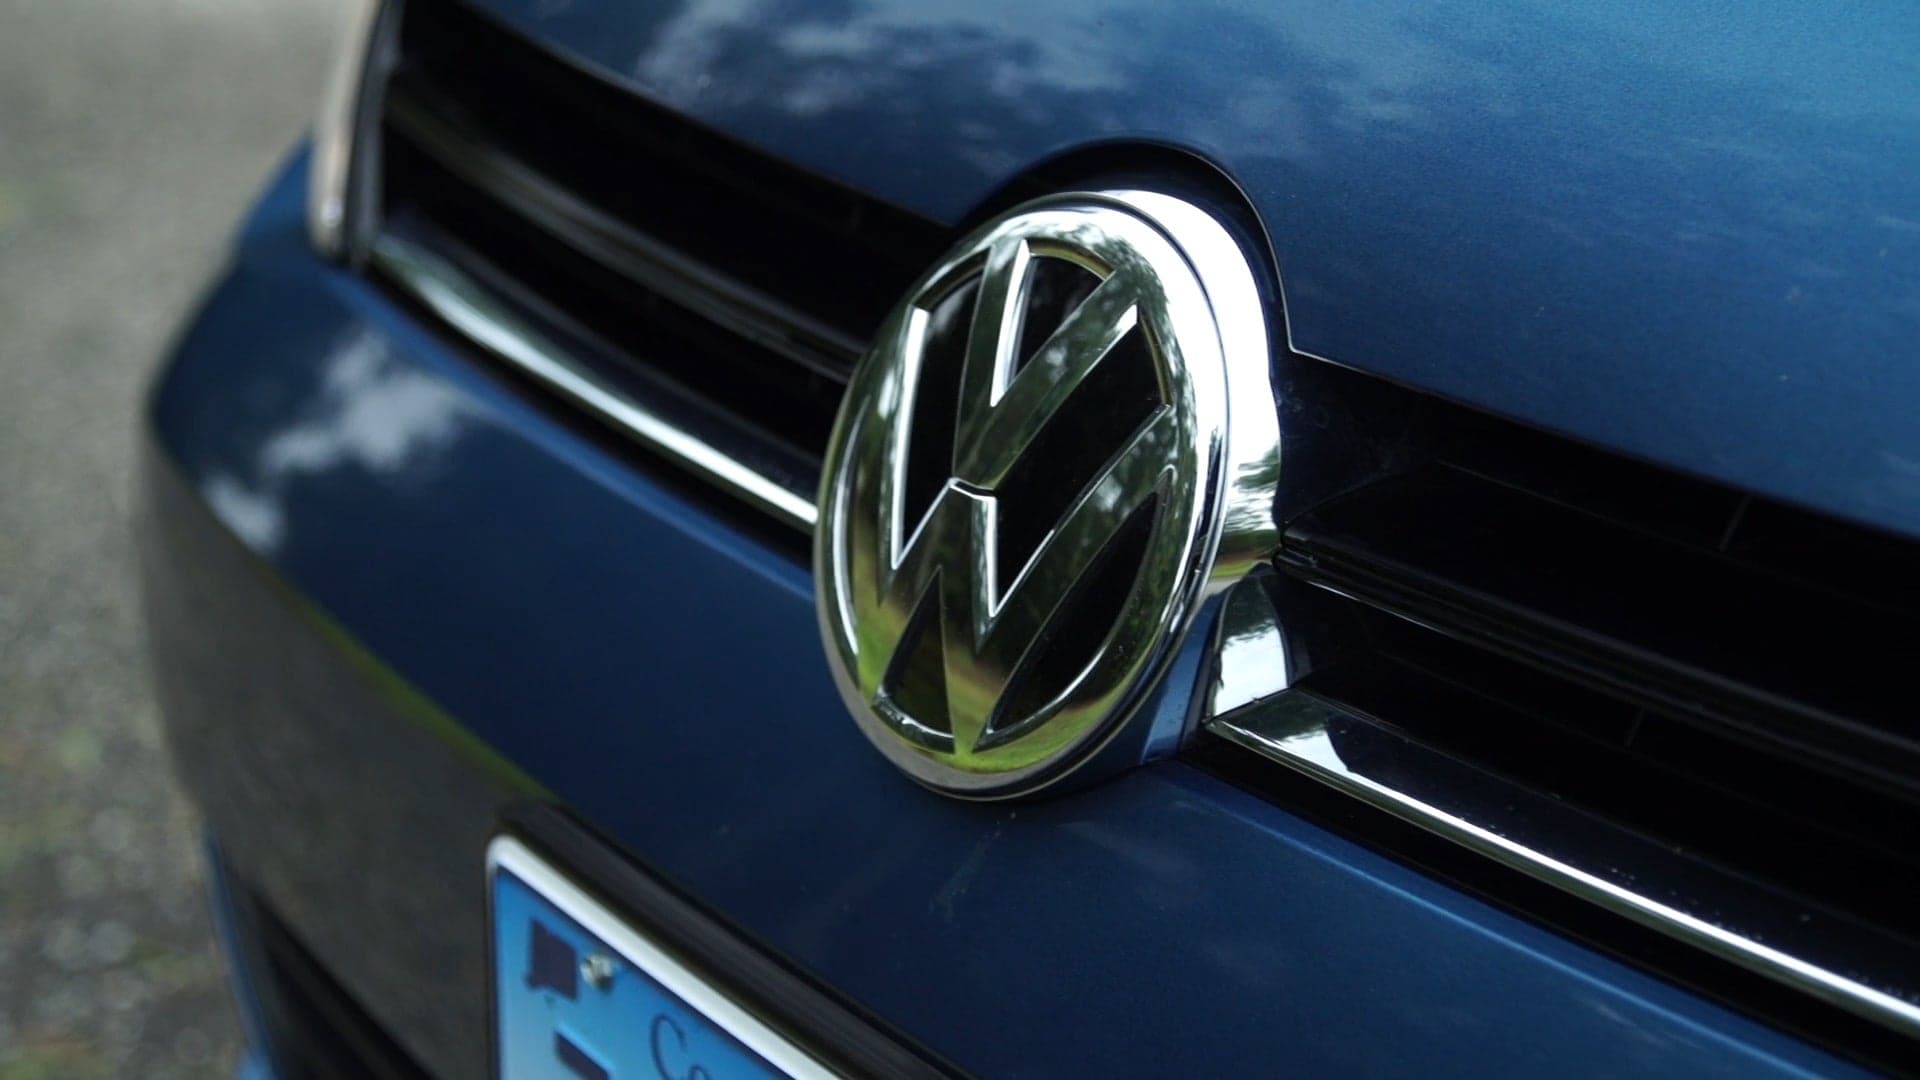 Volkswagen May Develop Its Own Ride-Sharing Service to Rival Uber